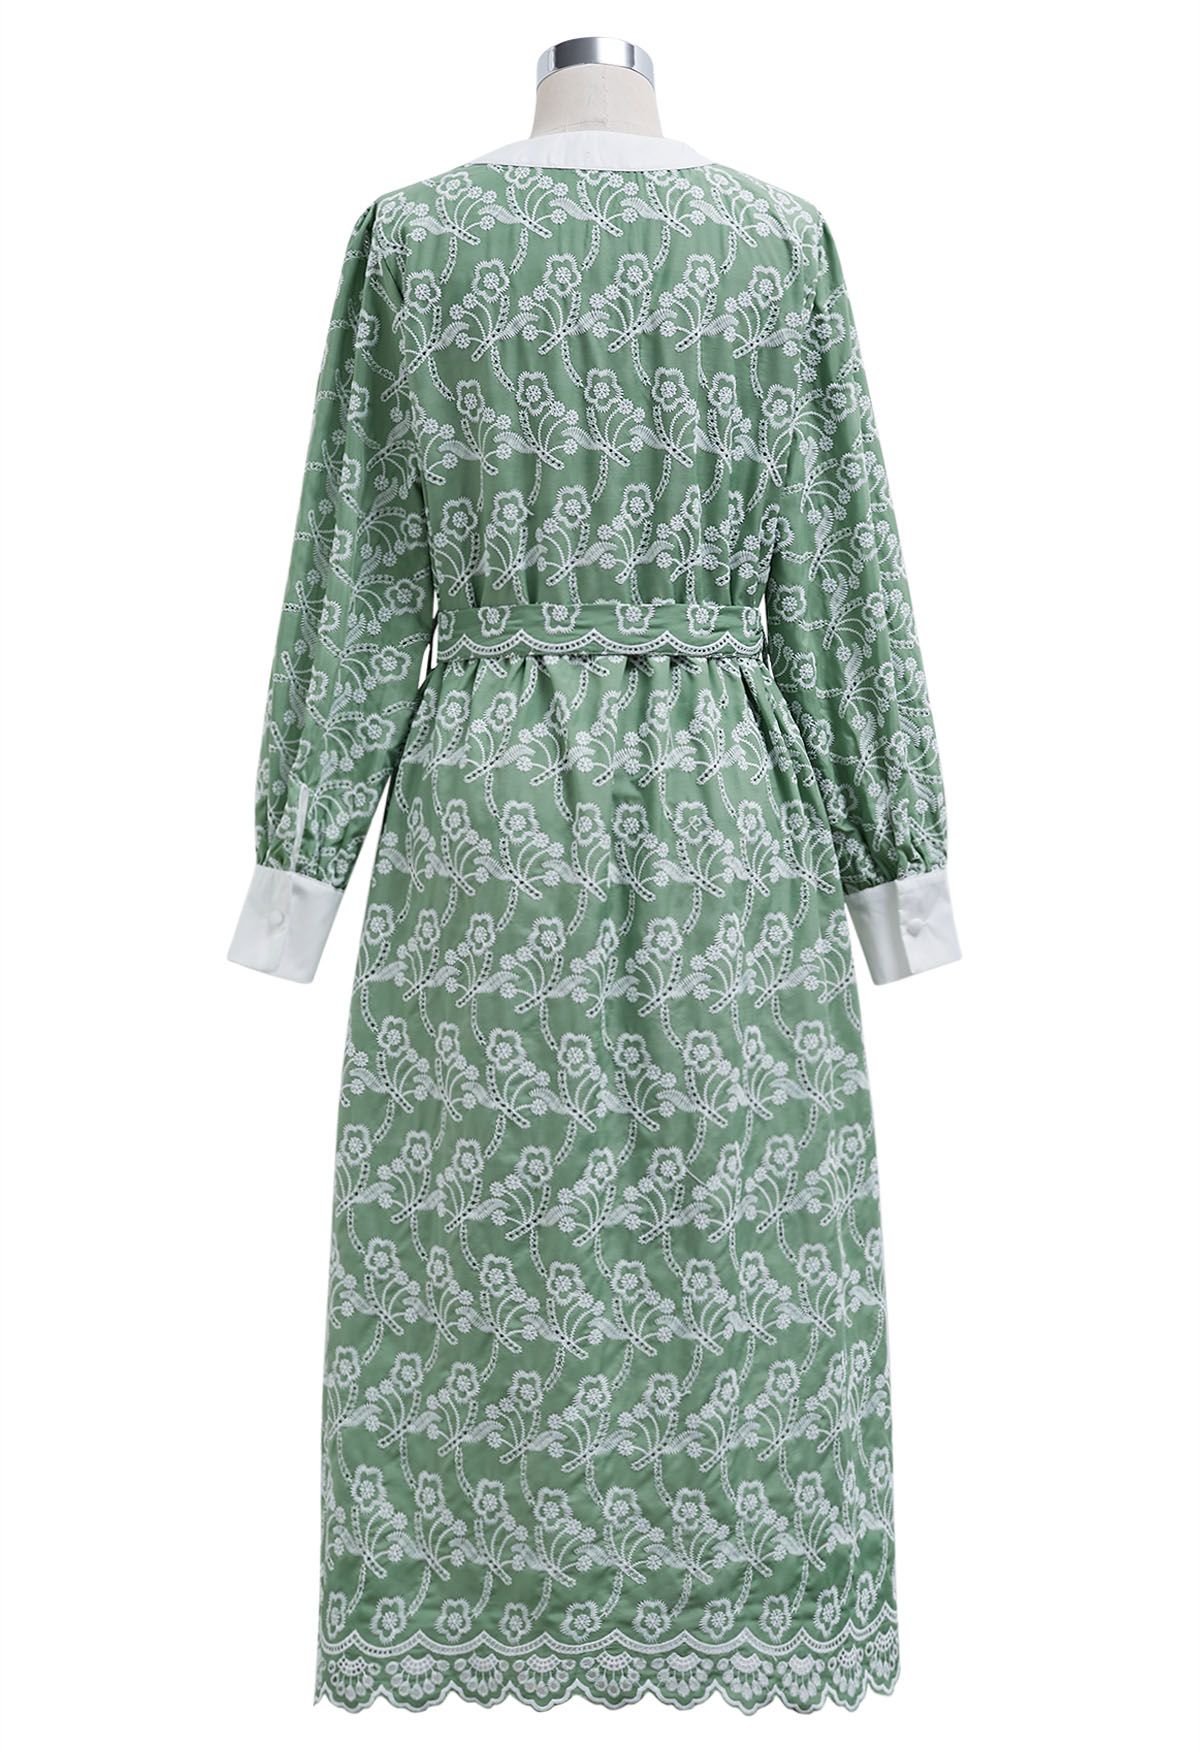 Dancing Floret Embroidered Button Down Dress in Green